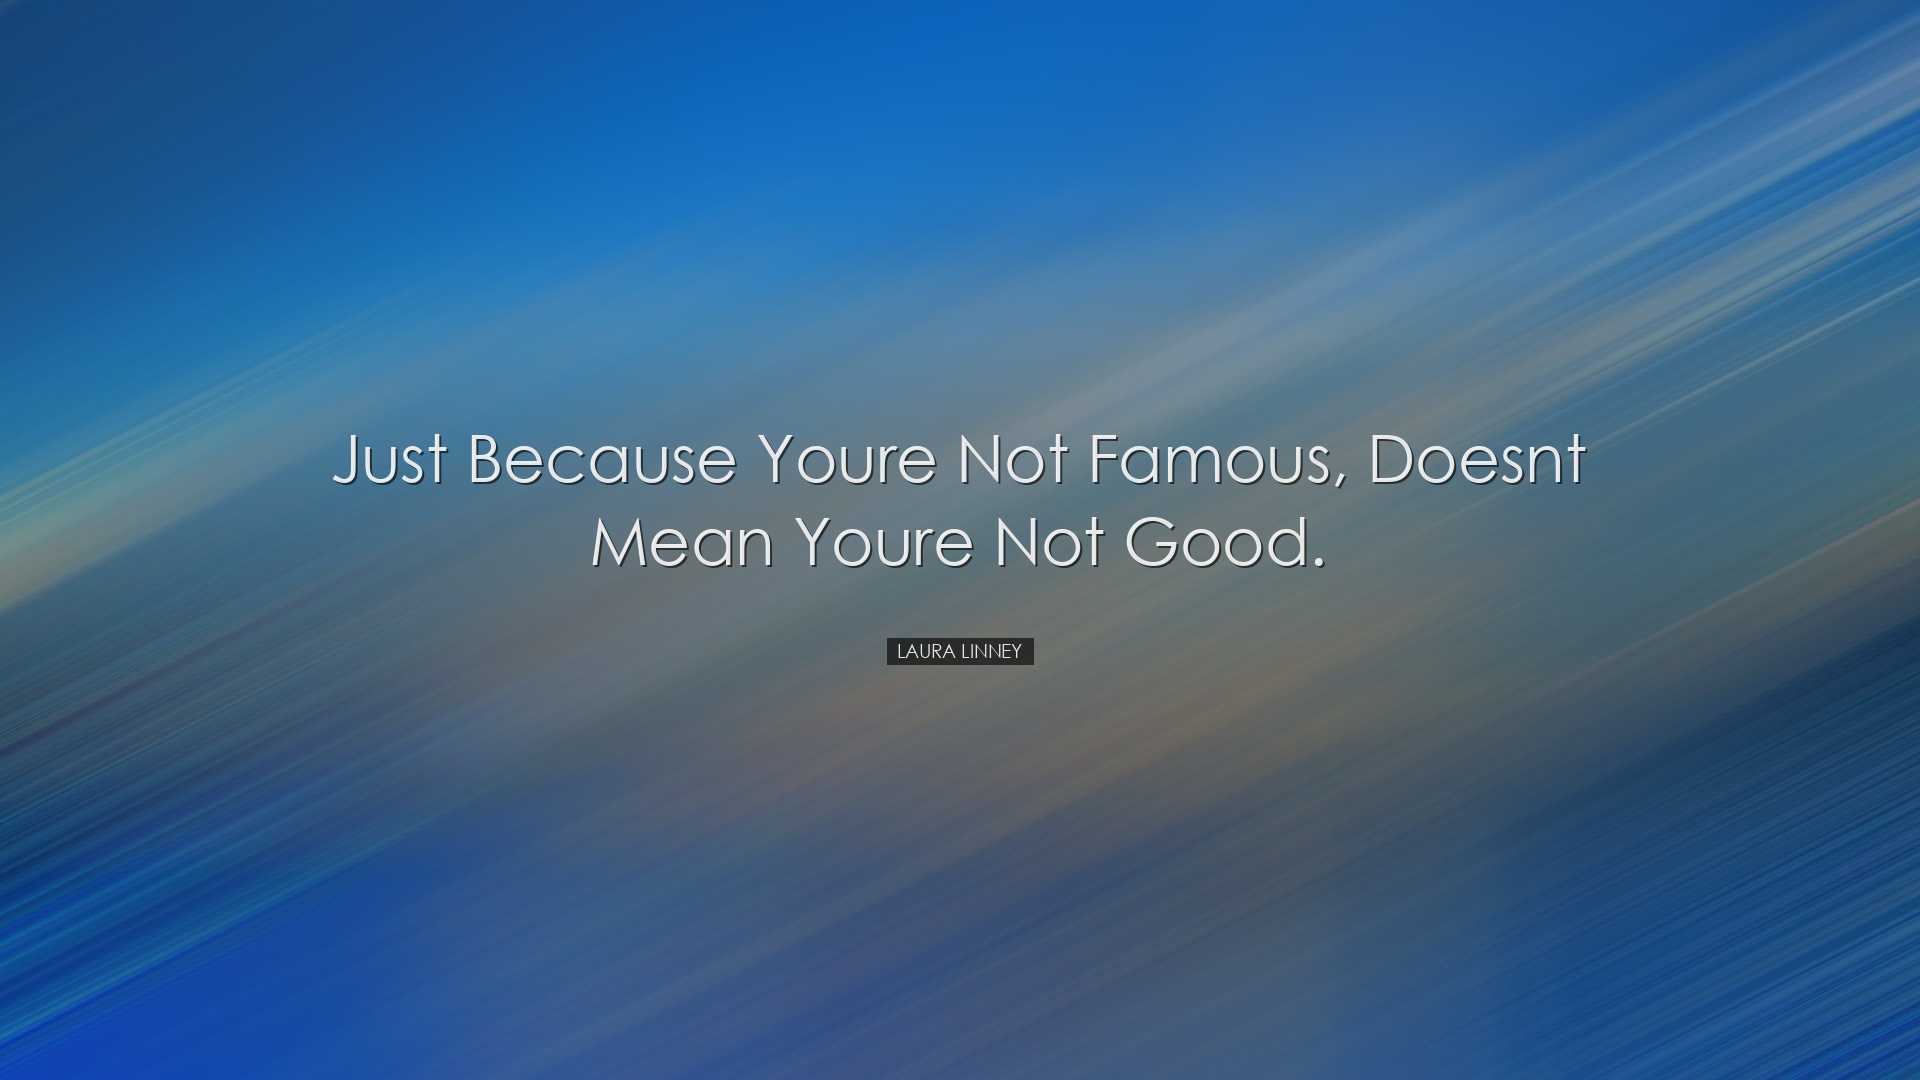 Just because youre not famous, doesnt mean youre not good. - Laura